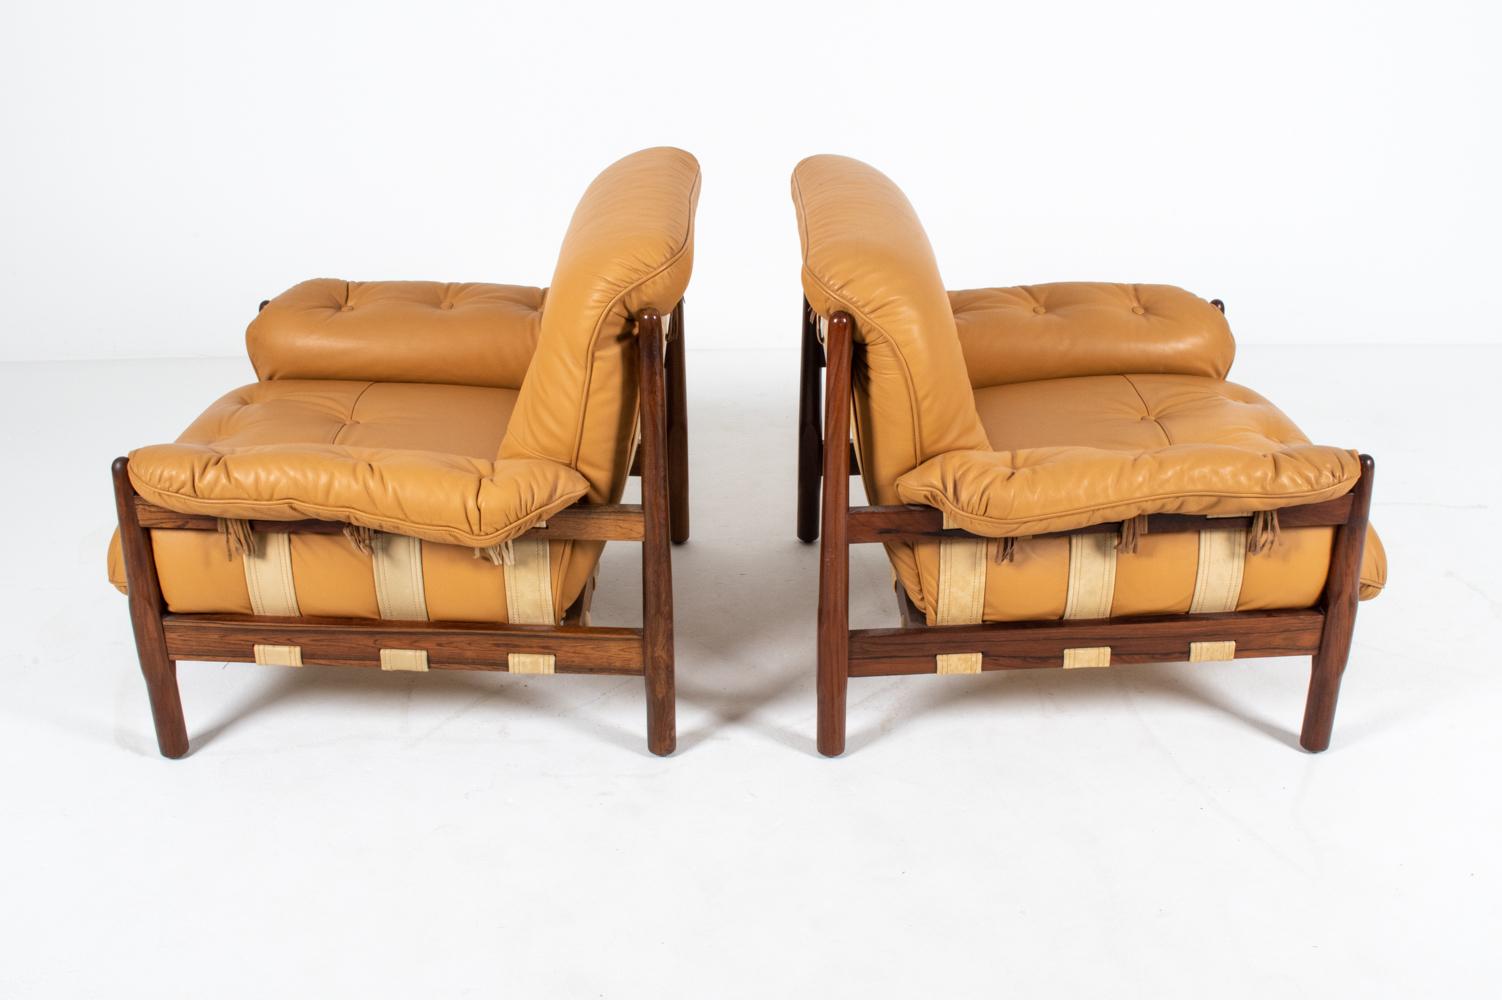 Pair of Brazilian Modernist Rosewood & Leather Easy Chairs, circa 1970s For Sale 3